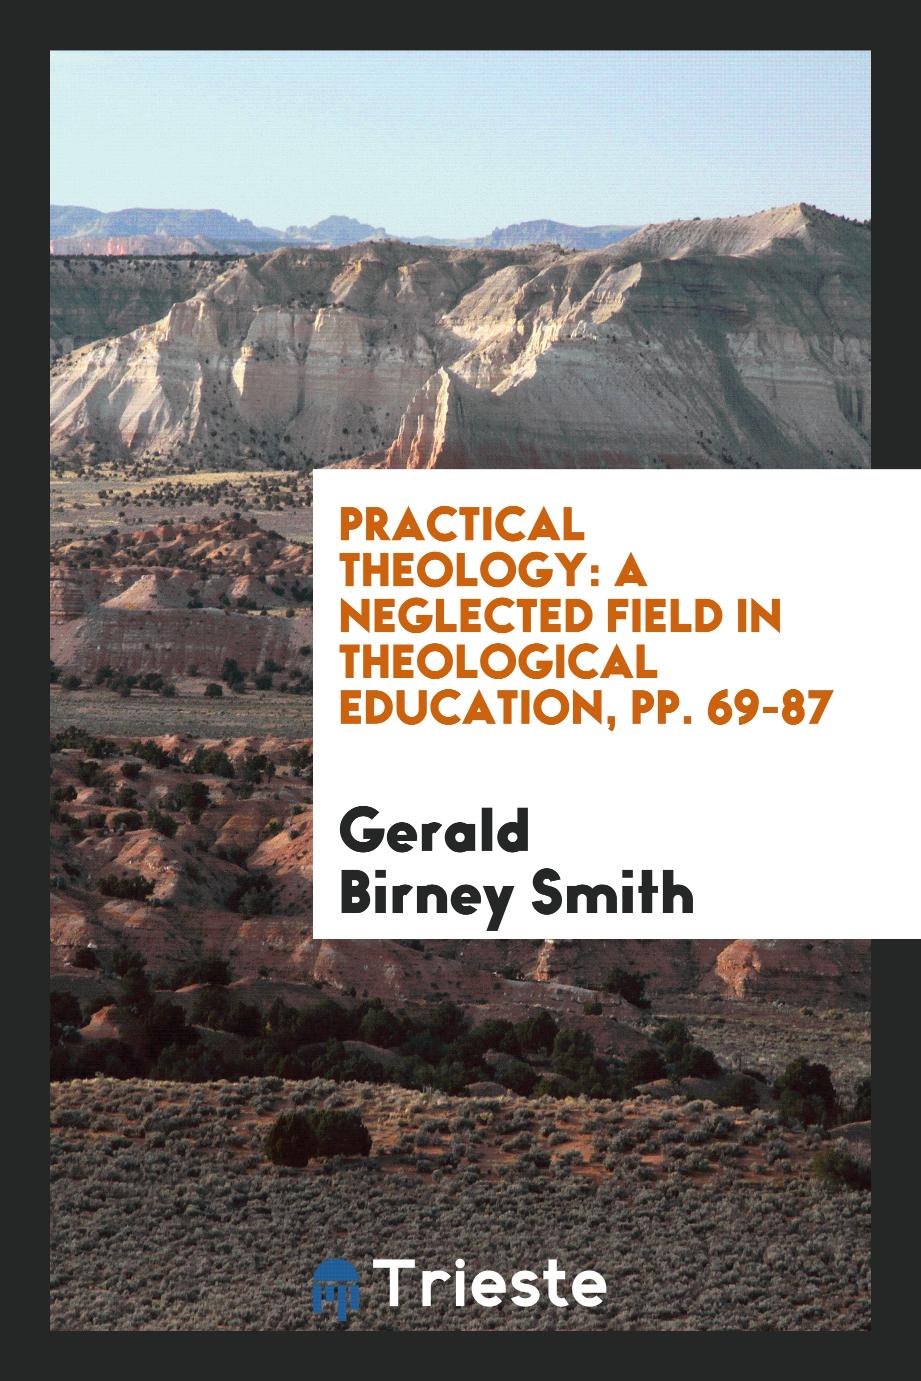 Practical Theology: A Neglected Field in Theological Education, pp. 69-87